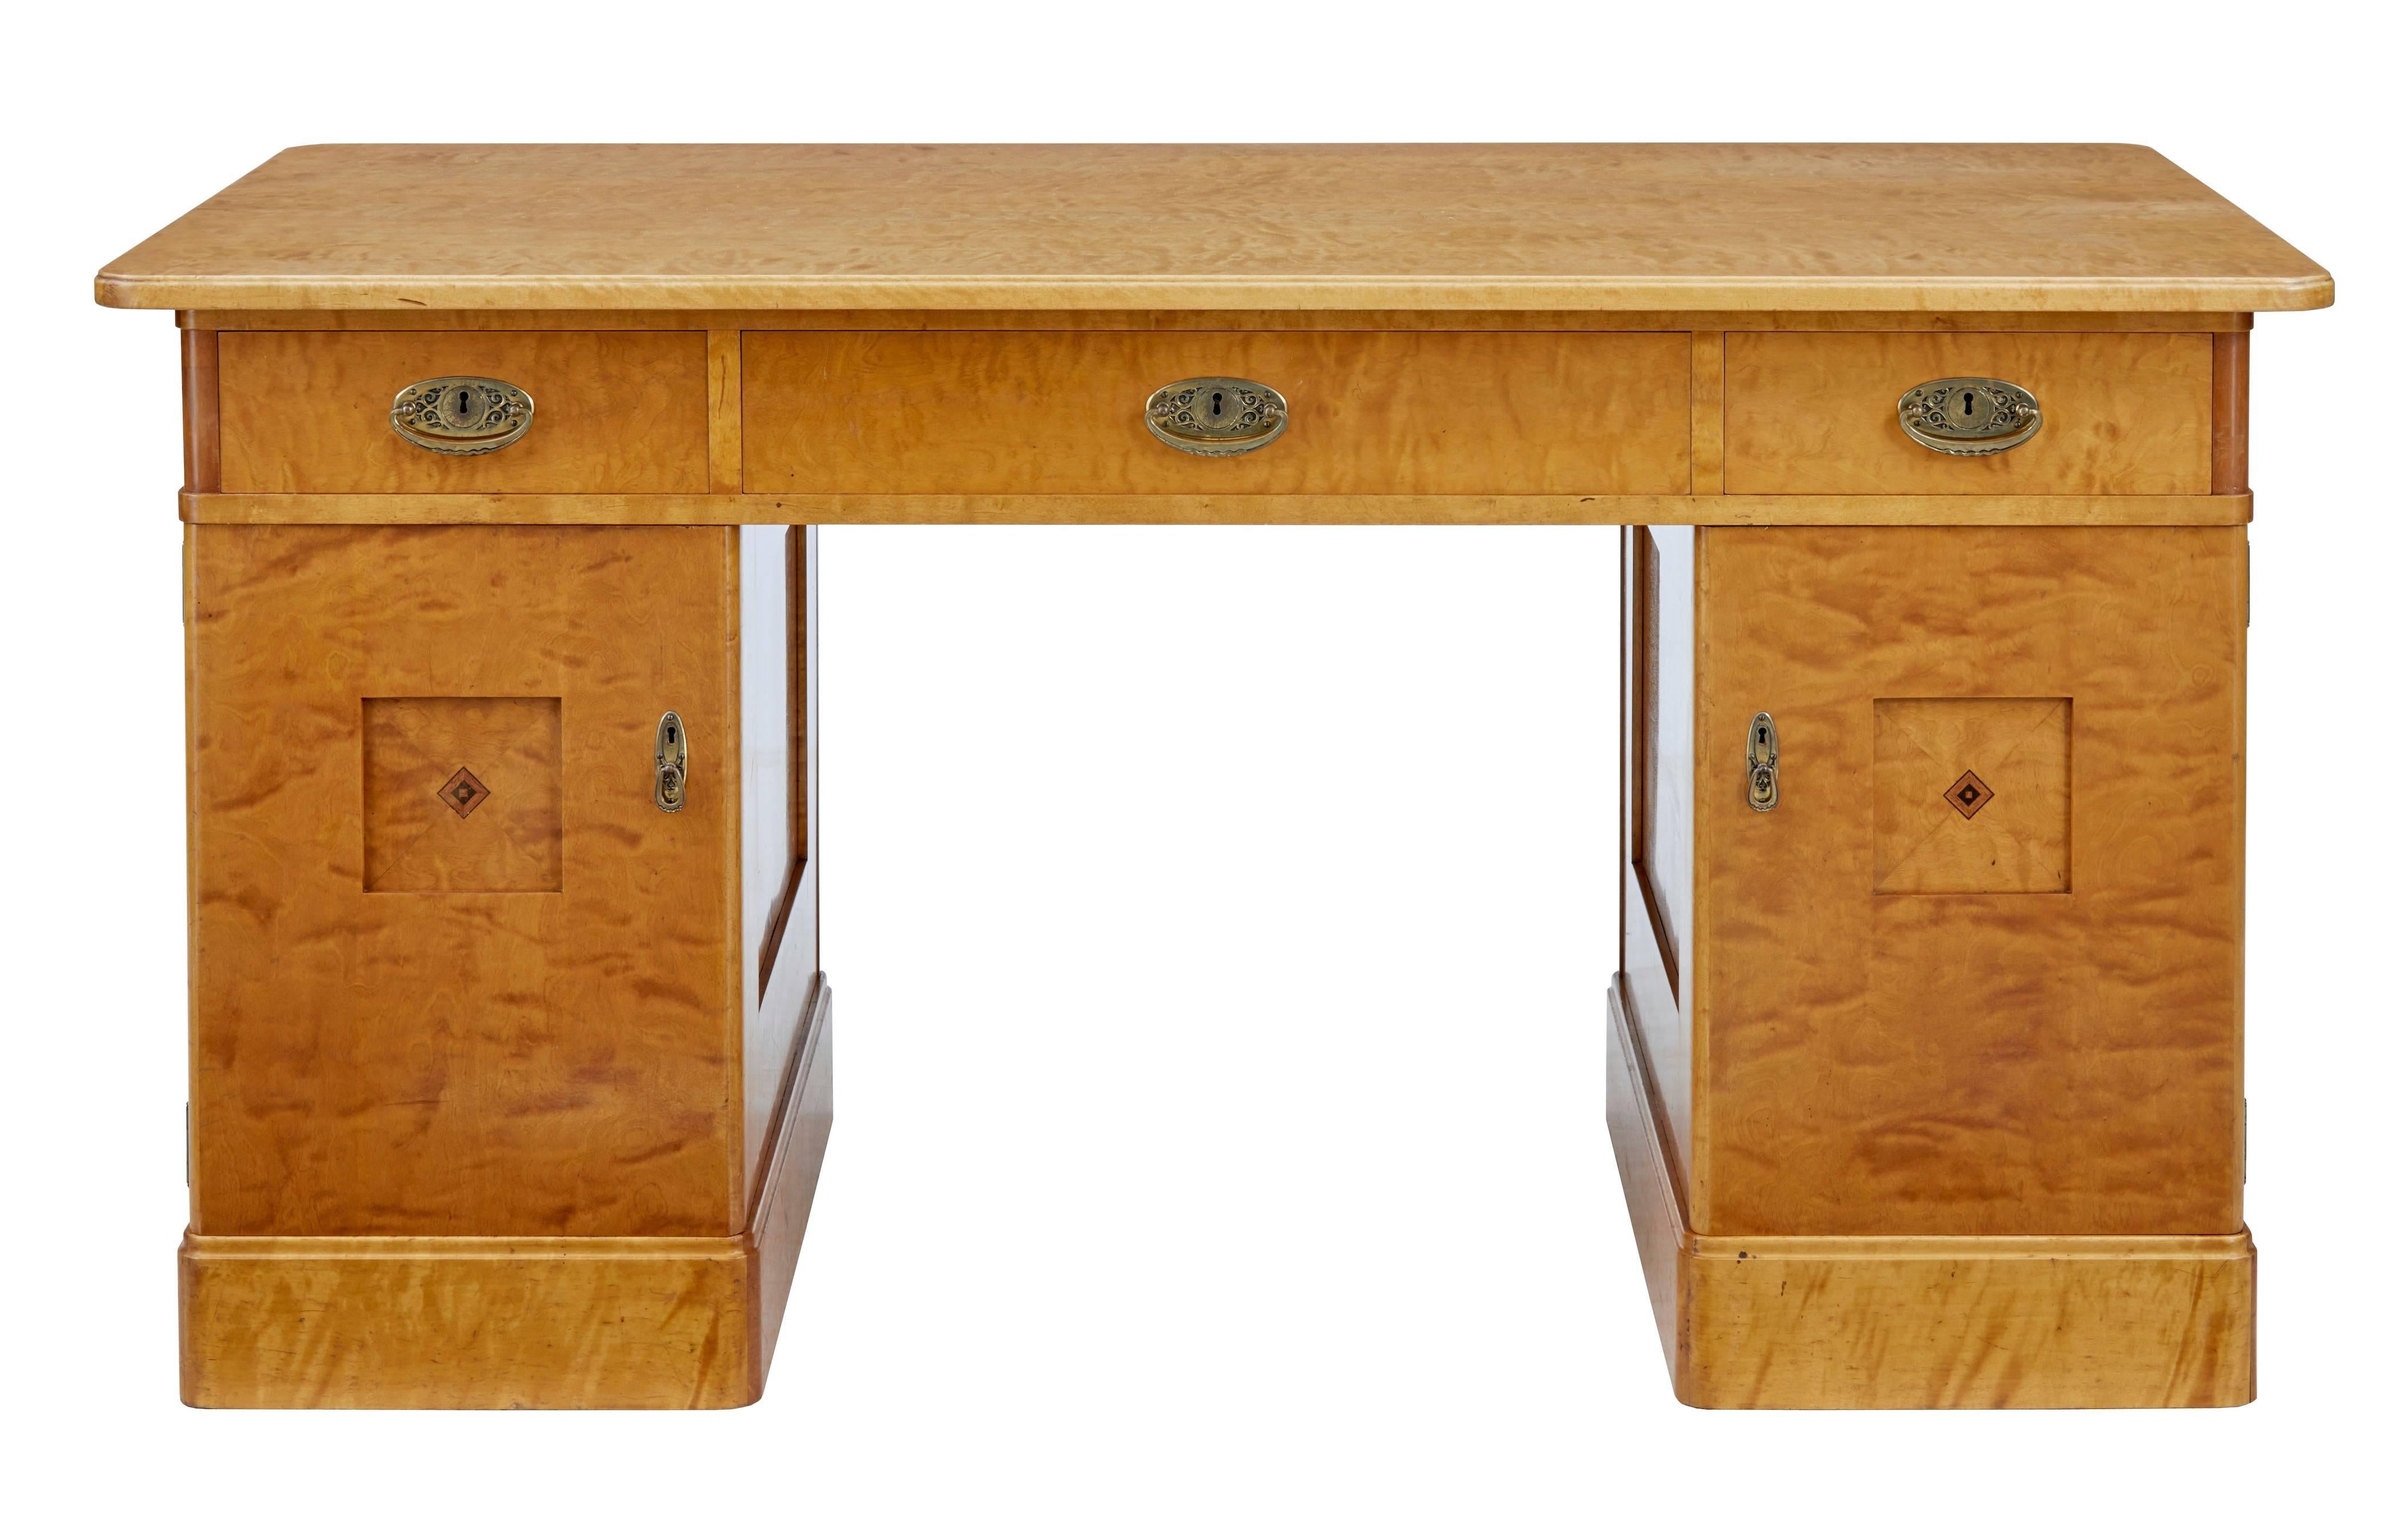 Good quality birch pedestal desk, circa 1895.
Desk comprising of three parts.
Top with flat birch veneered writing surface, below which are three full depth drawers which open with ornate brass handles.
Pedestal doors with small inlaid design to